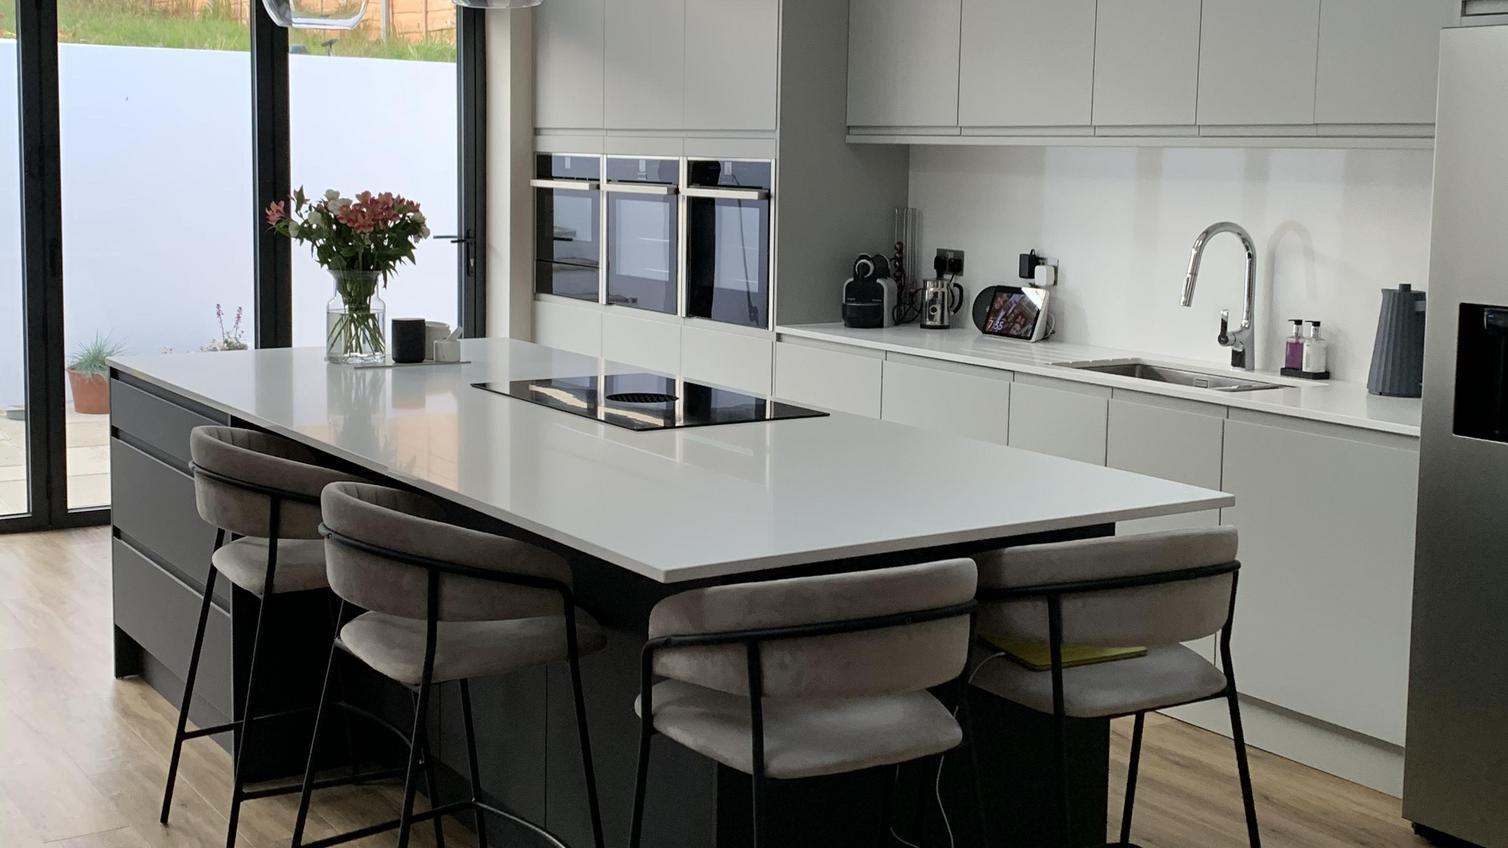 A modern two-tone kitchen idea using white and grey integrated handle cupboard doors in a glossy finish and an island layout.